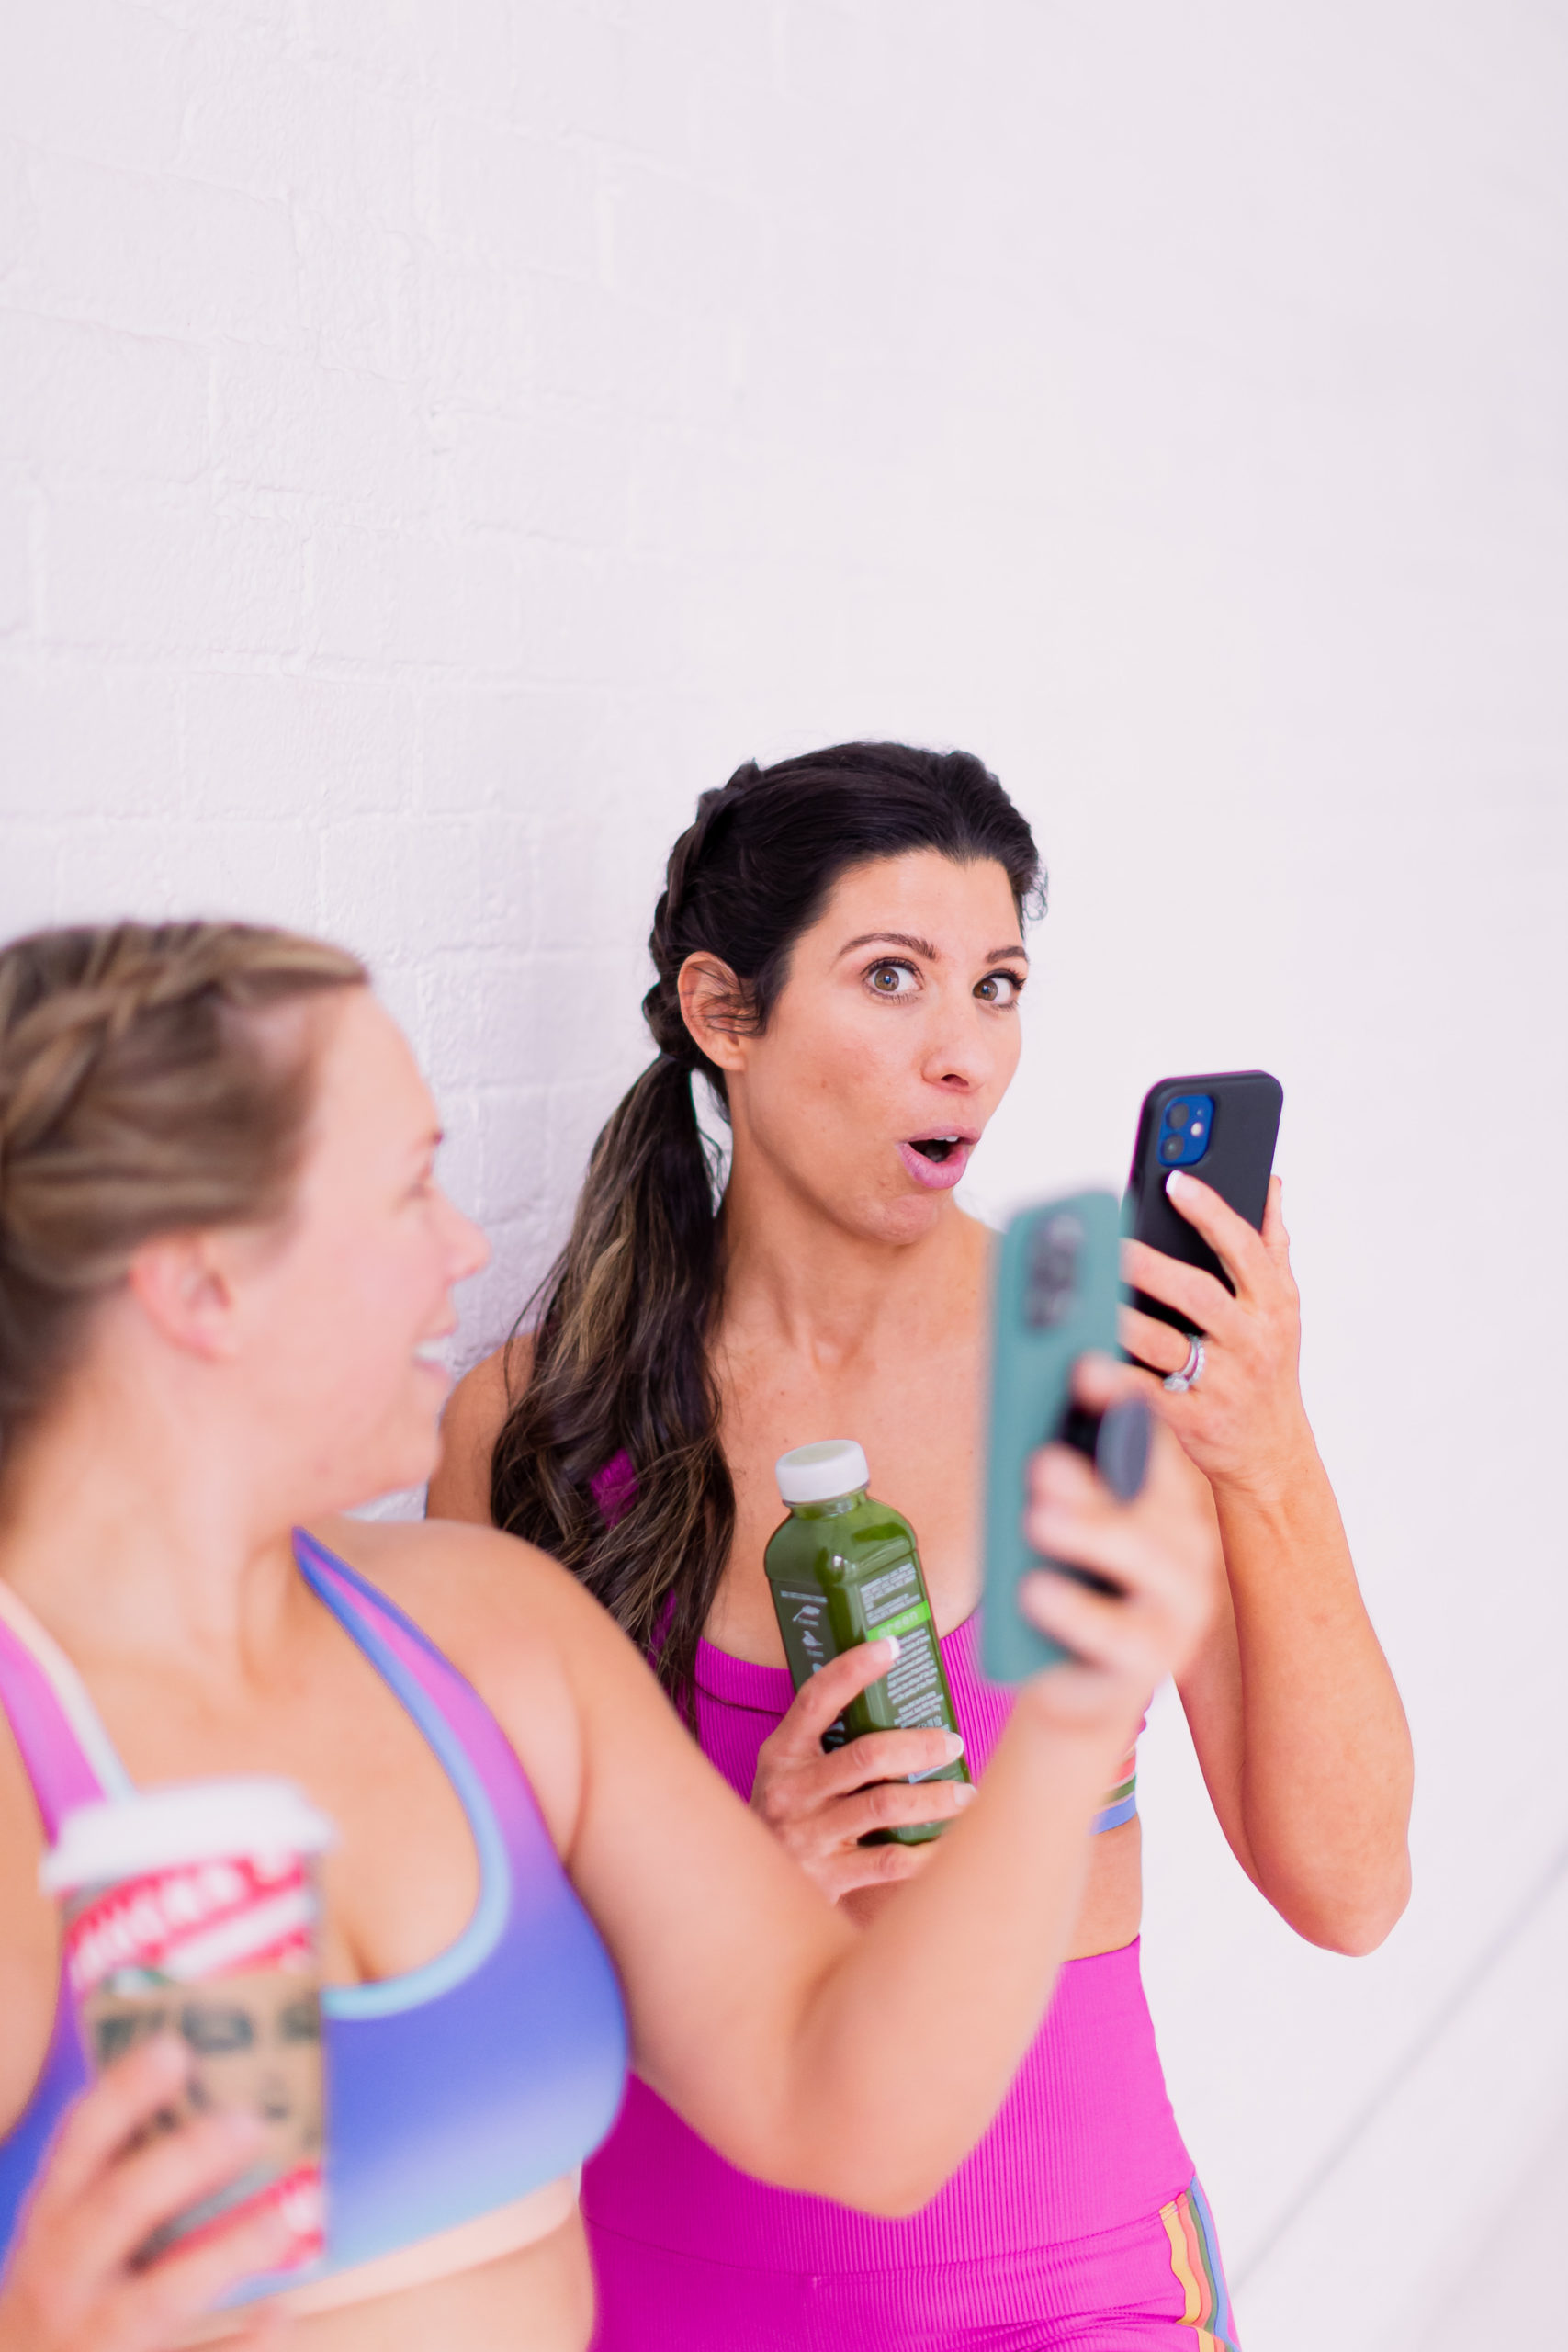 Woman in Workout Gear Looking at Phone